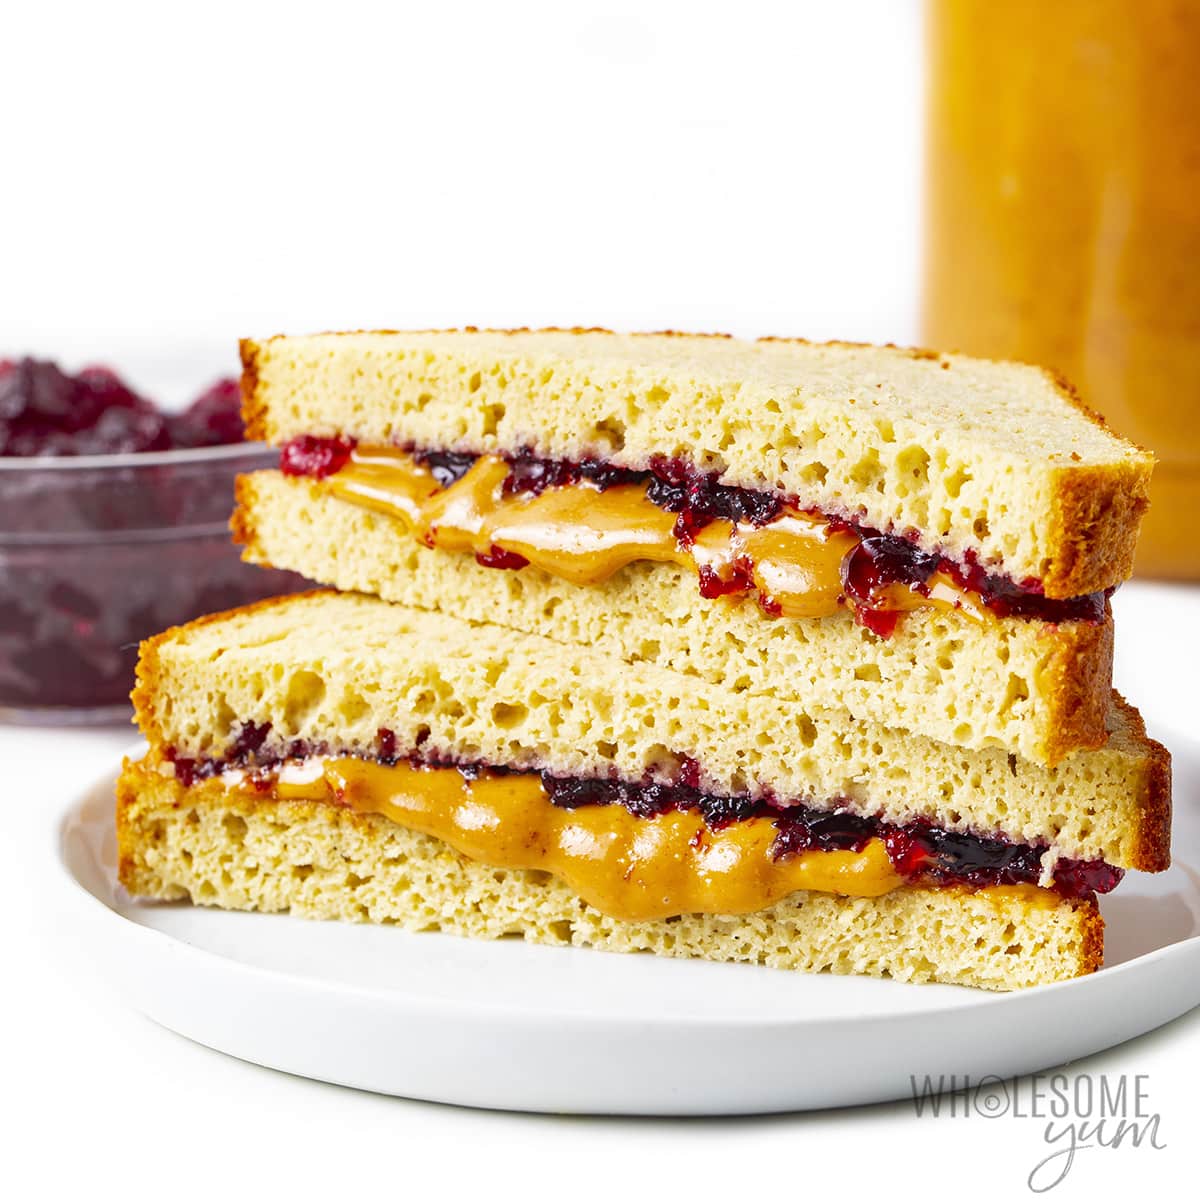 Peanut butter and jelly keto sandwich stacked